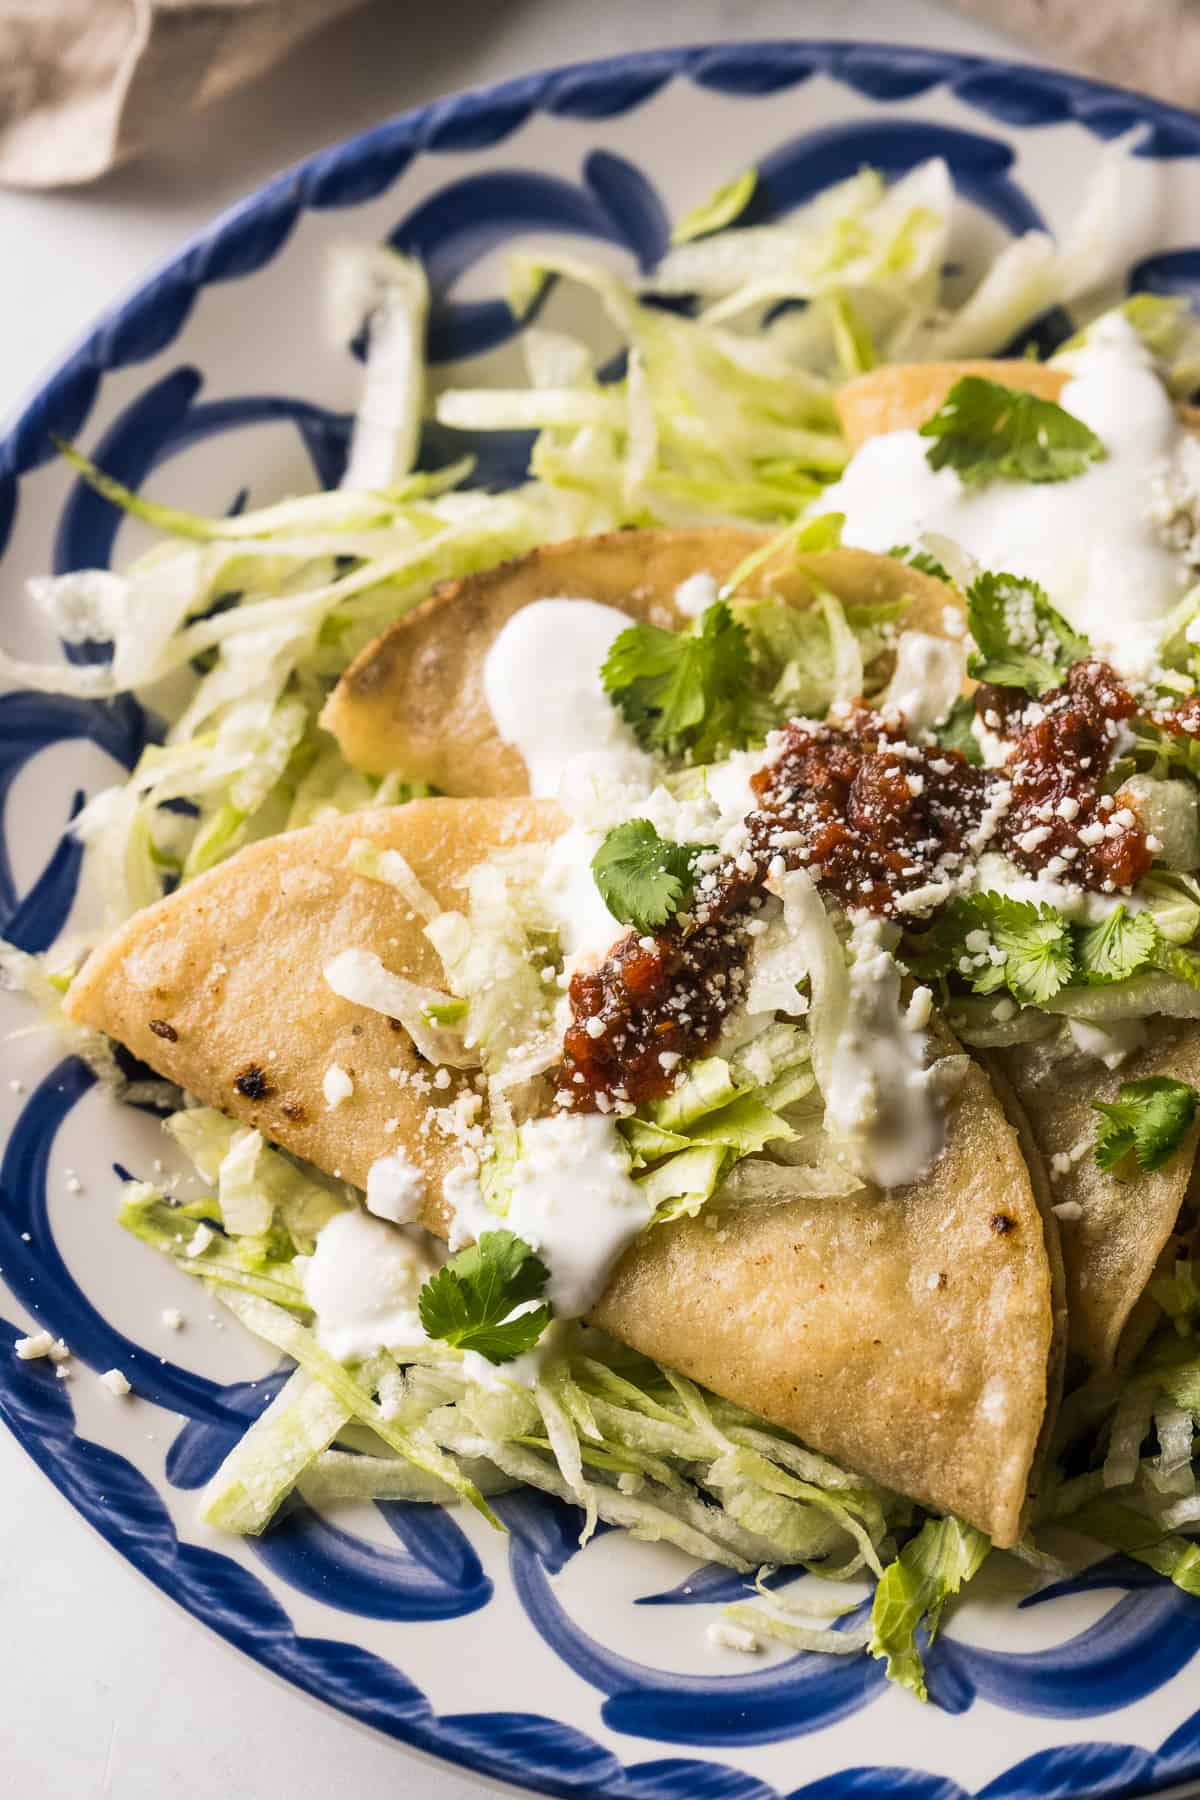 Tacos dorados on a plate served with mexican crema, red salsa, and shredded lettuce.